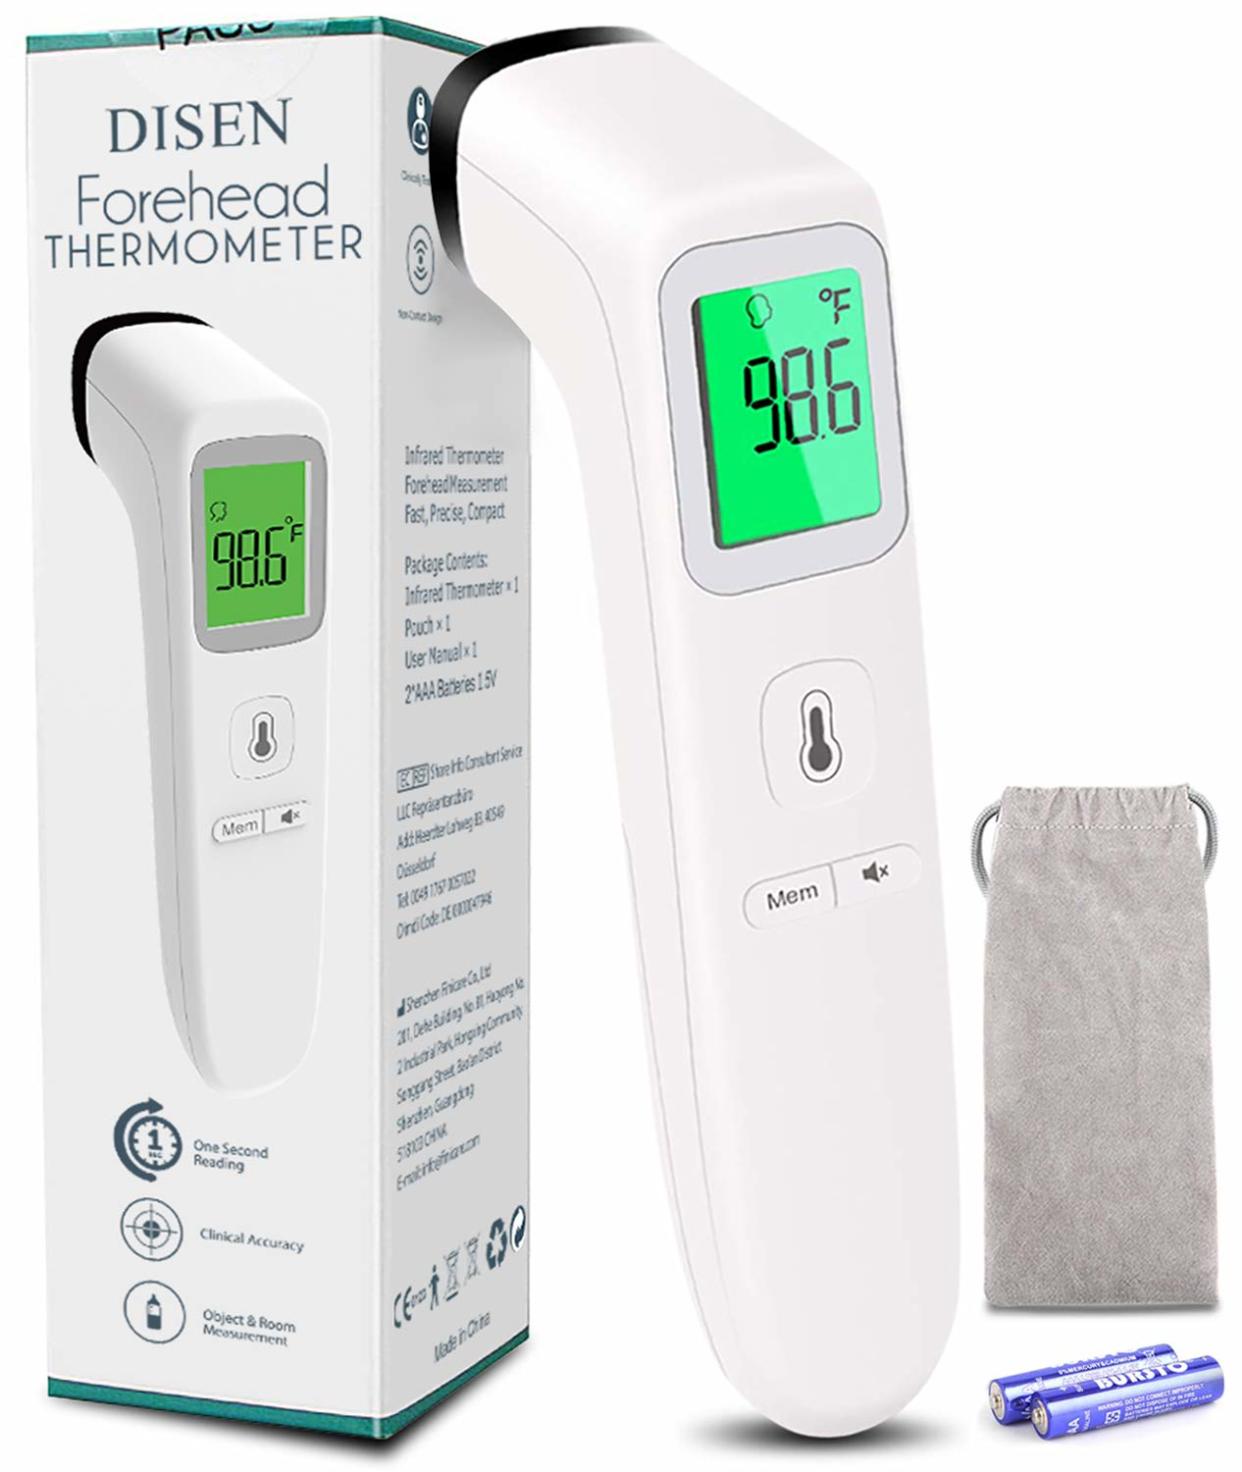 Disen No-Contact Thermometer